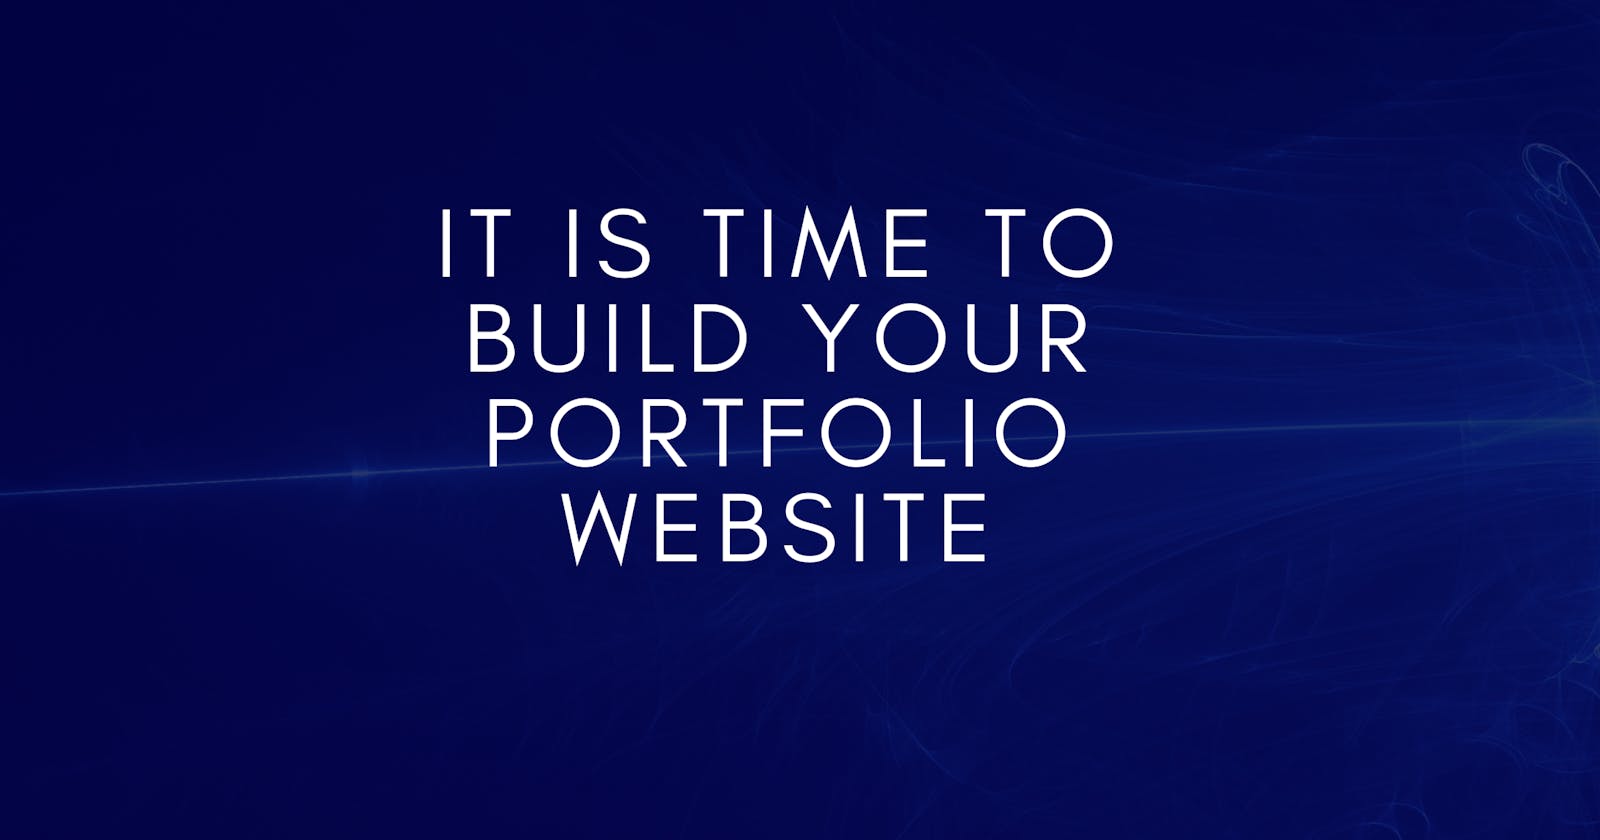 It is time to build your portfolio website